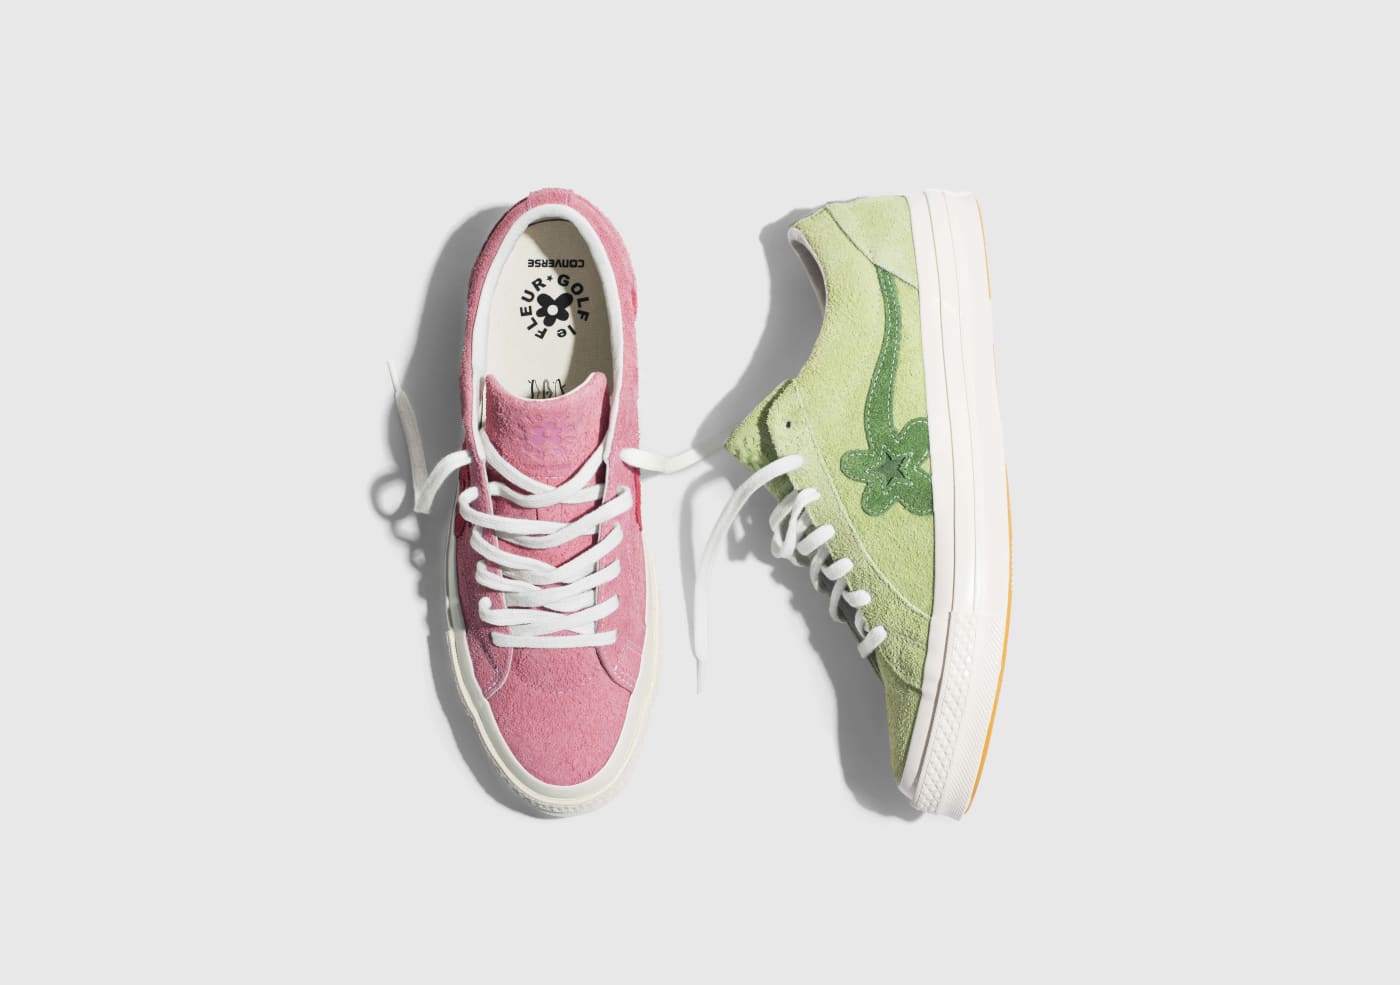 Tyler, the Creator Offers a Take on 2018 with the Latest Golf Le Converse Collection | Complex UK